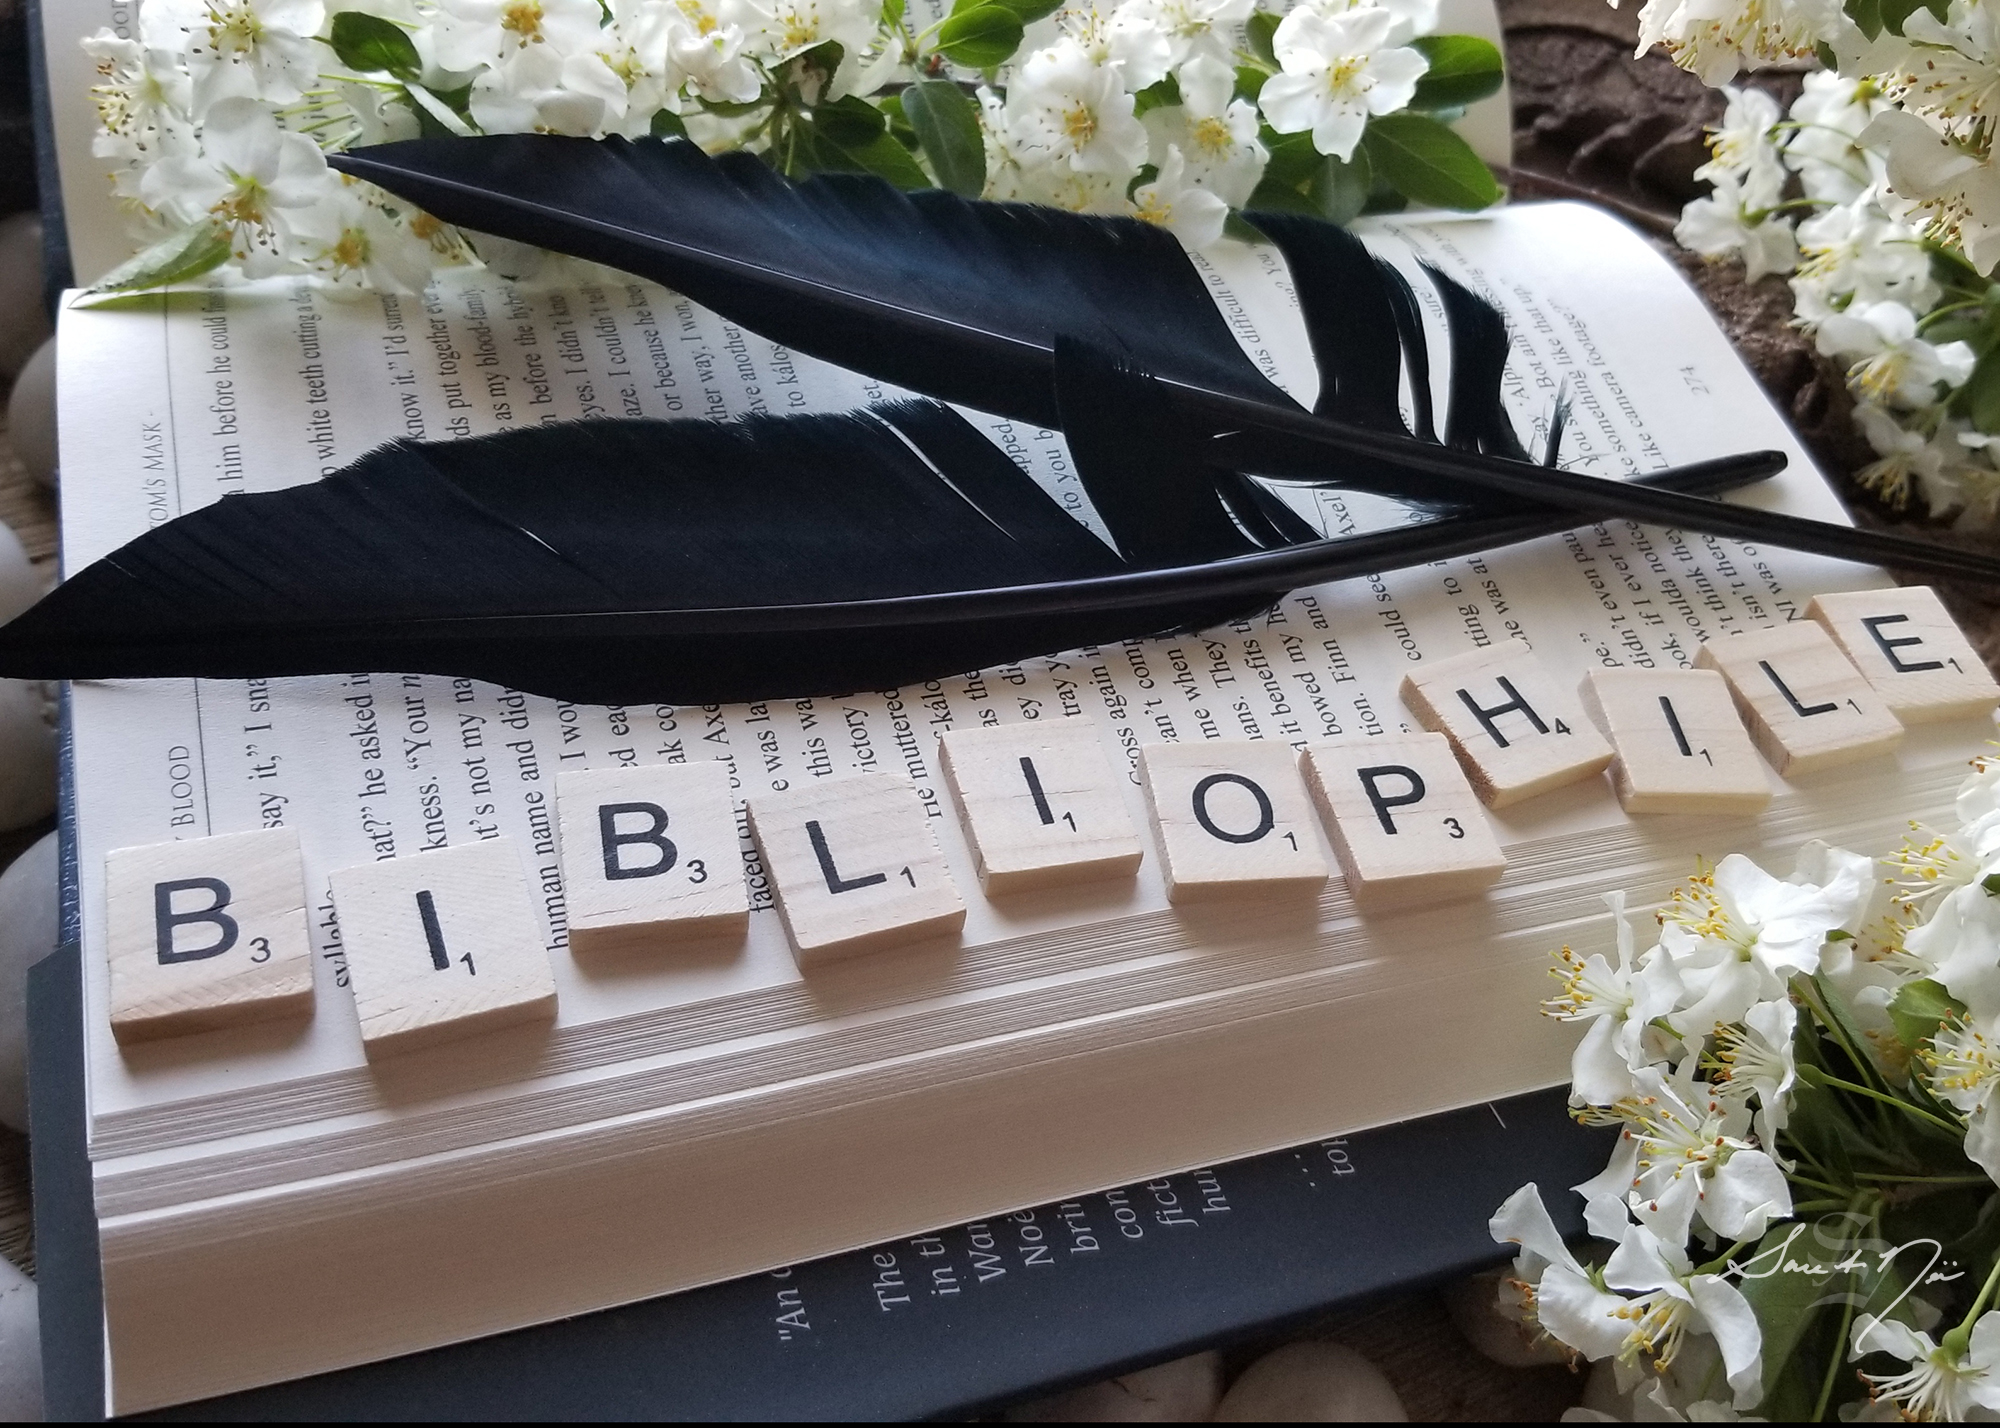 open book with Scrabble tiles spelling "bibliophile"